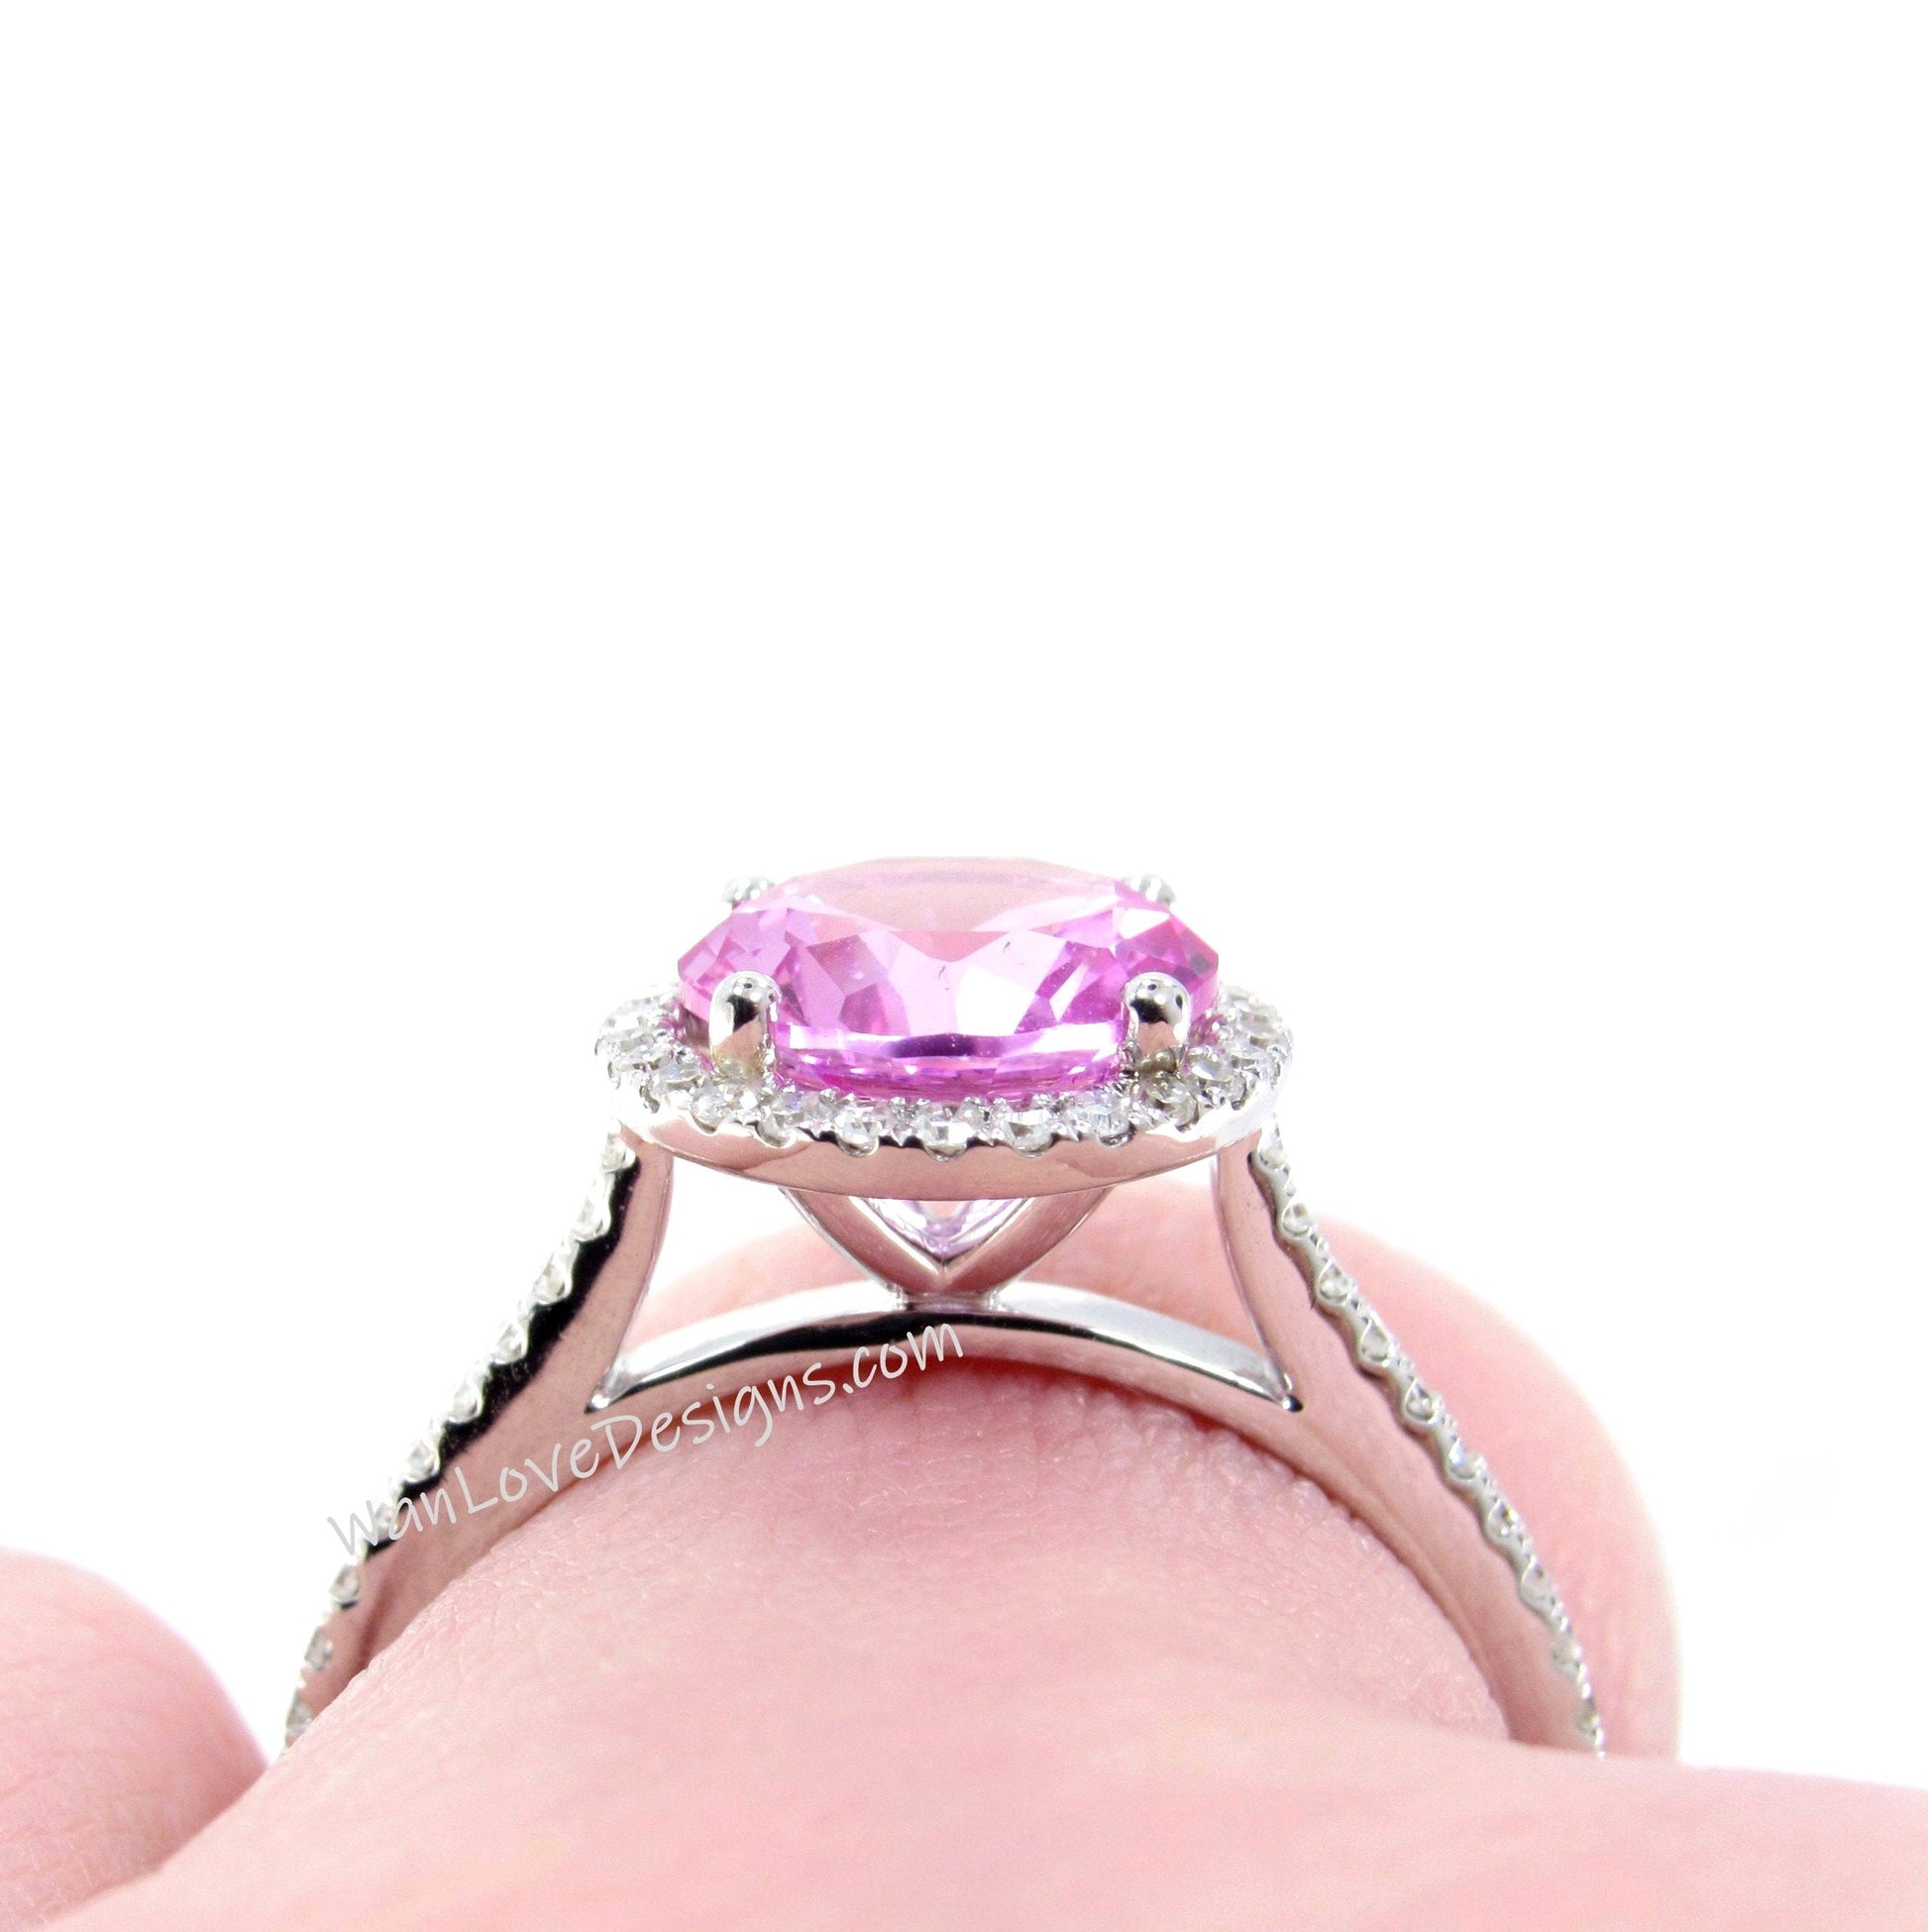 Pink Sapphire & Diamonds Round Halo Cathedral Engagement Ring, 2ct 8mm, White Gold, Wedding, Anniversary Gift, Ready to ship Wan Love Designs